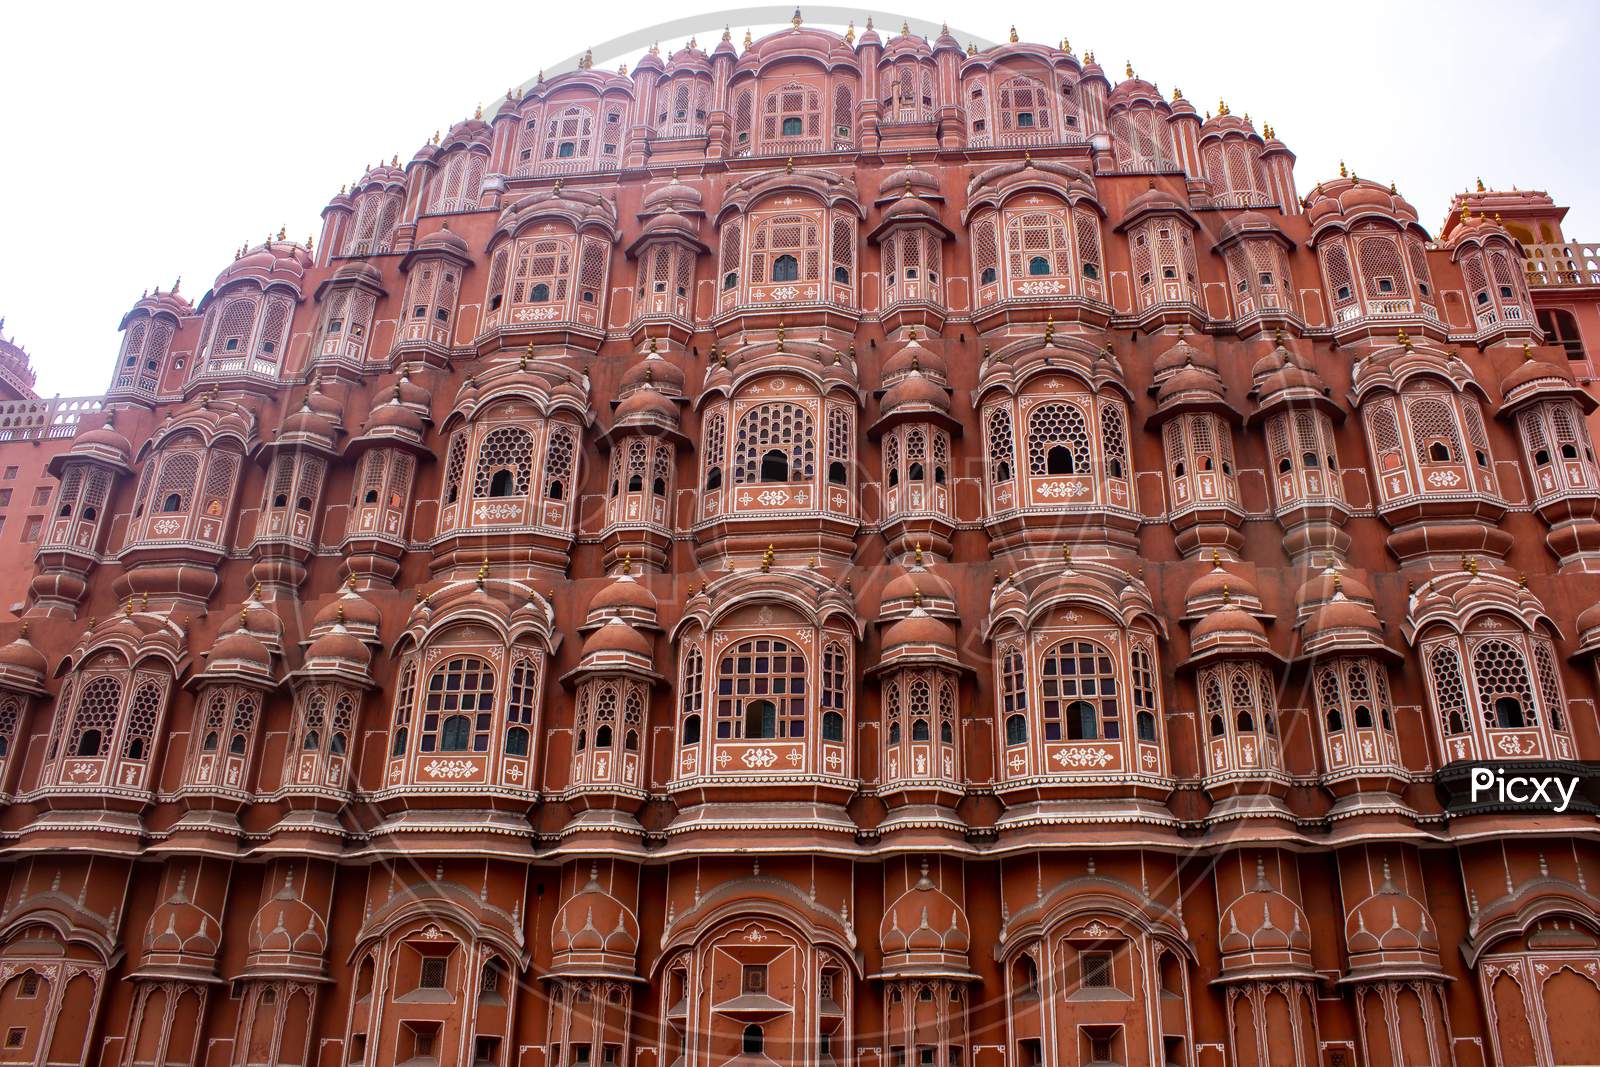 The mighty Mahal.